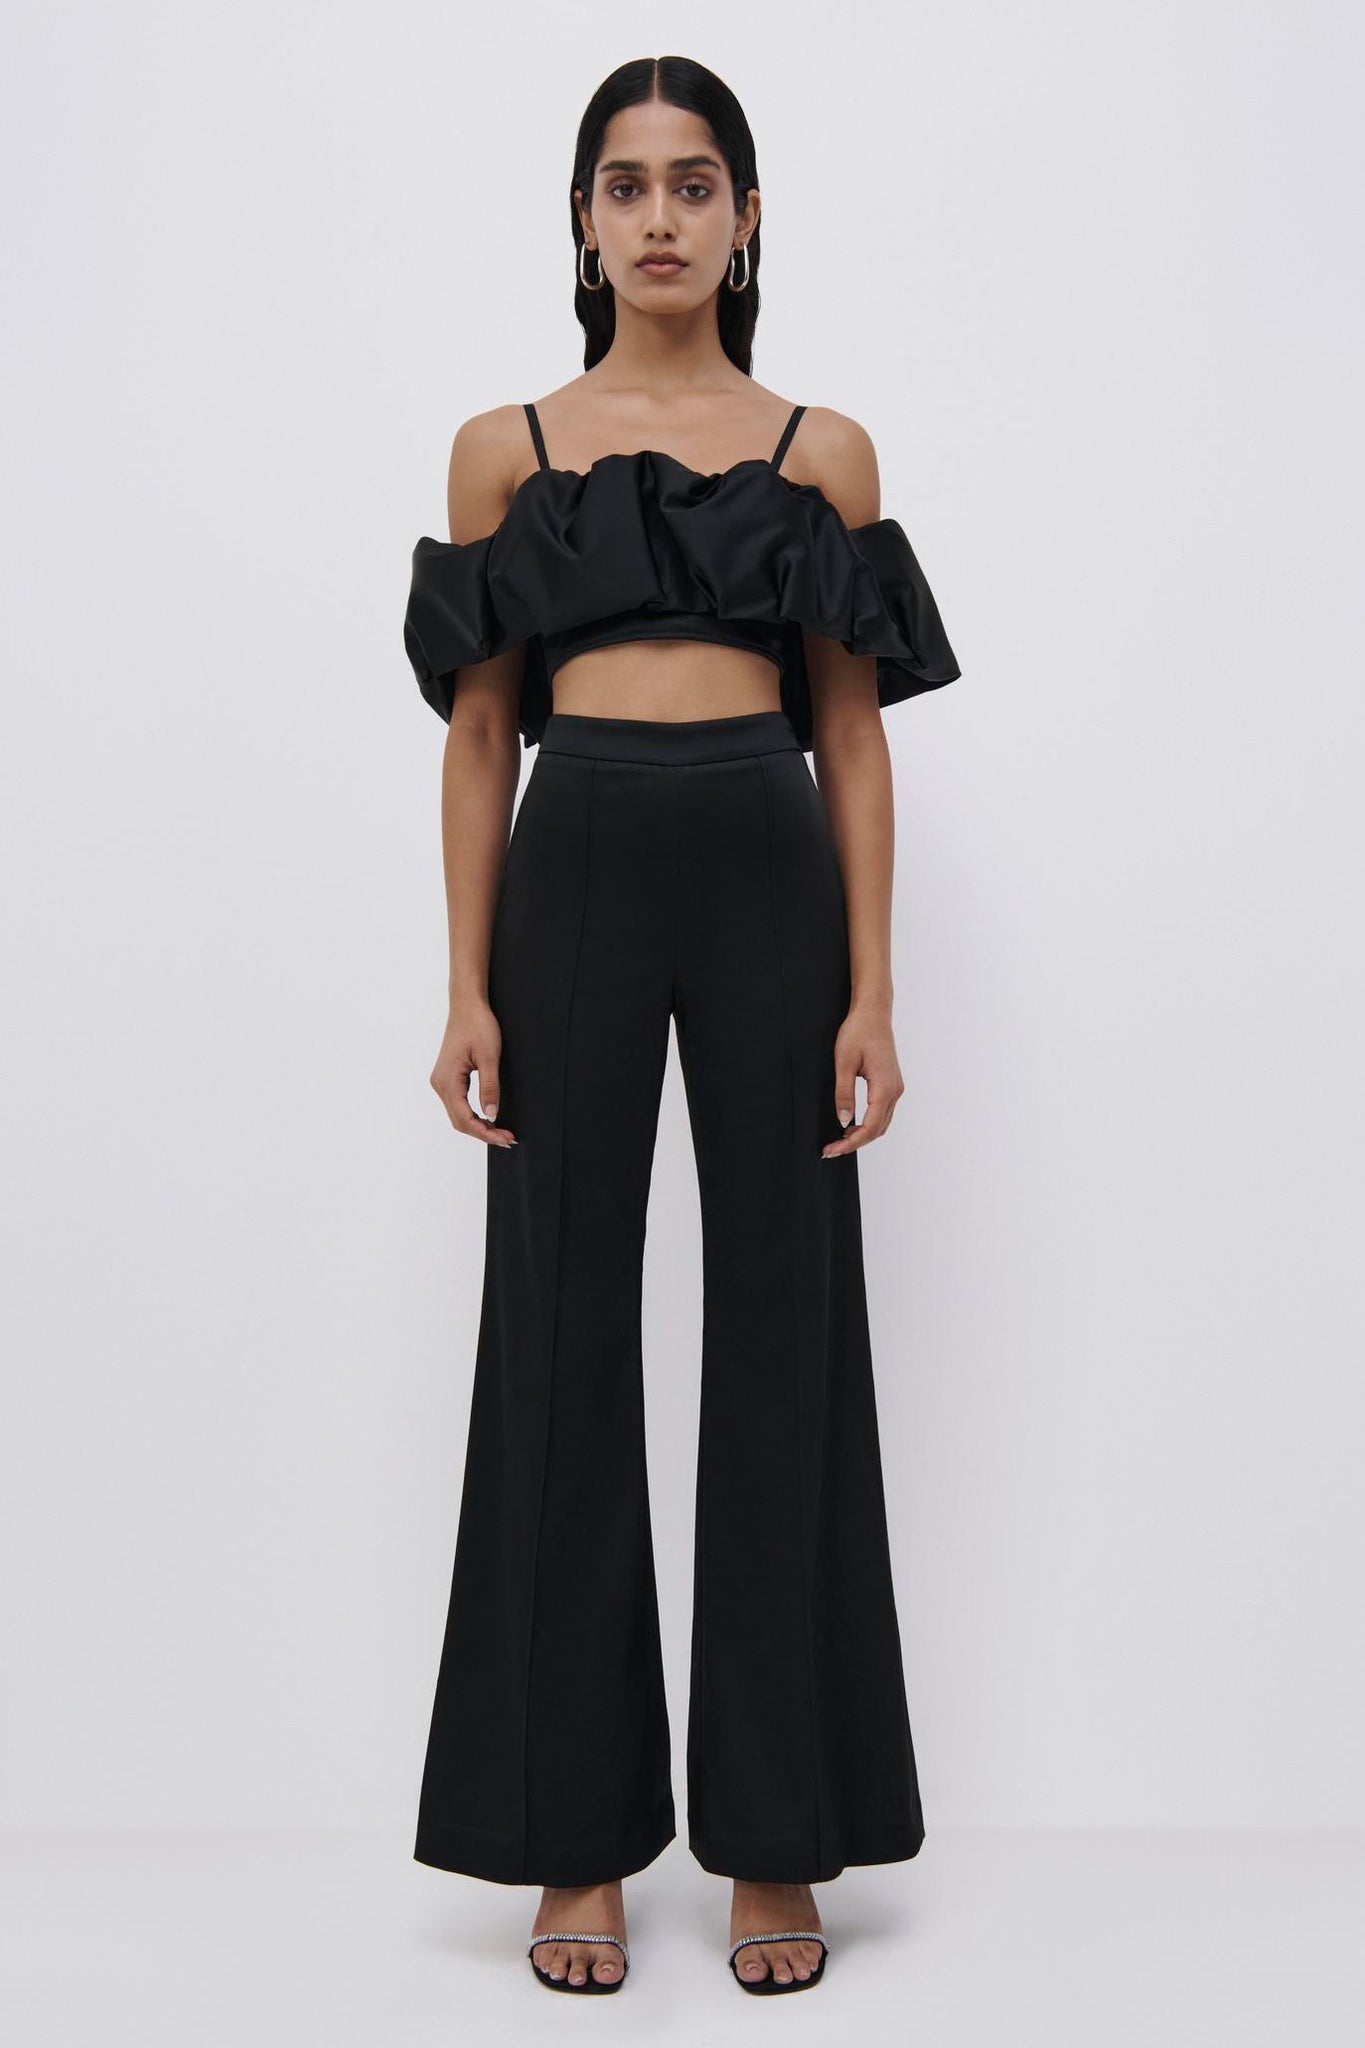 SIMKHAI Shirley Lace Bustier Crop Top in Black